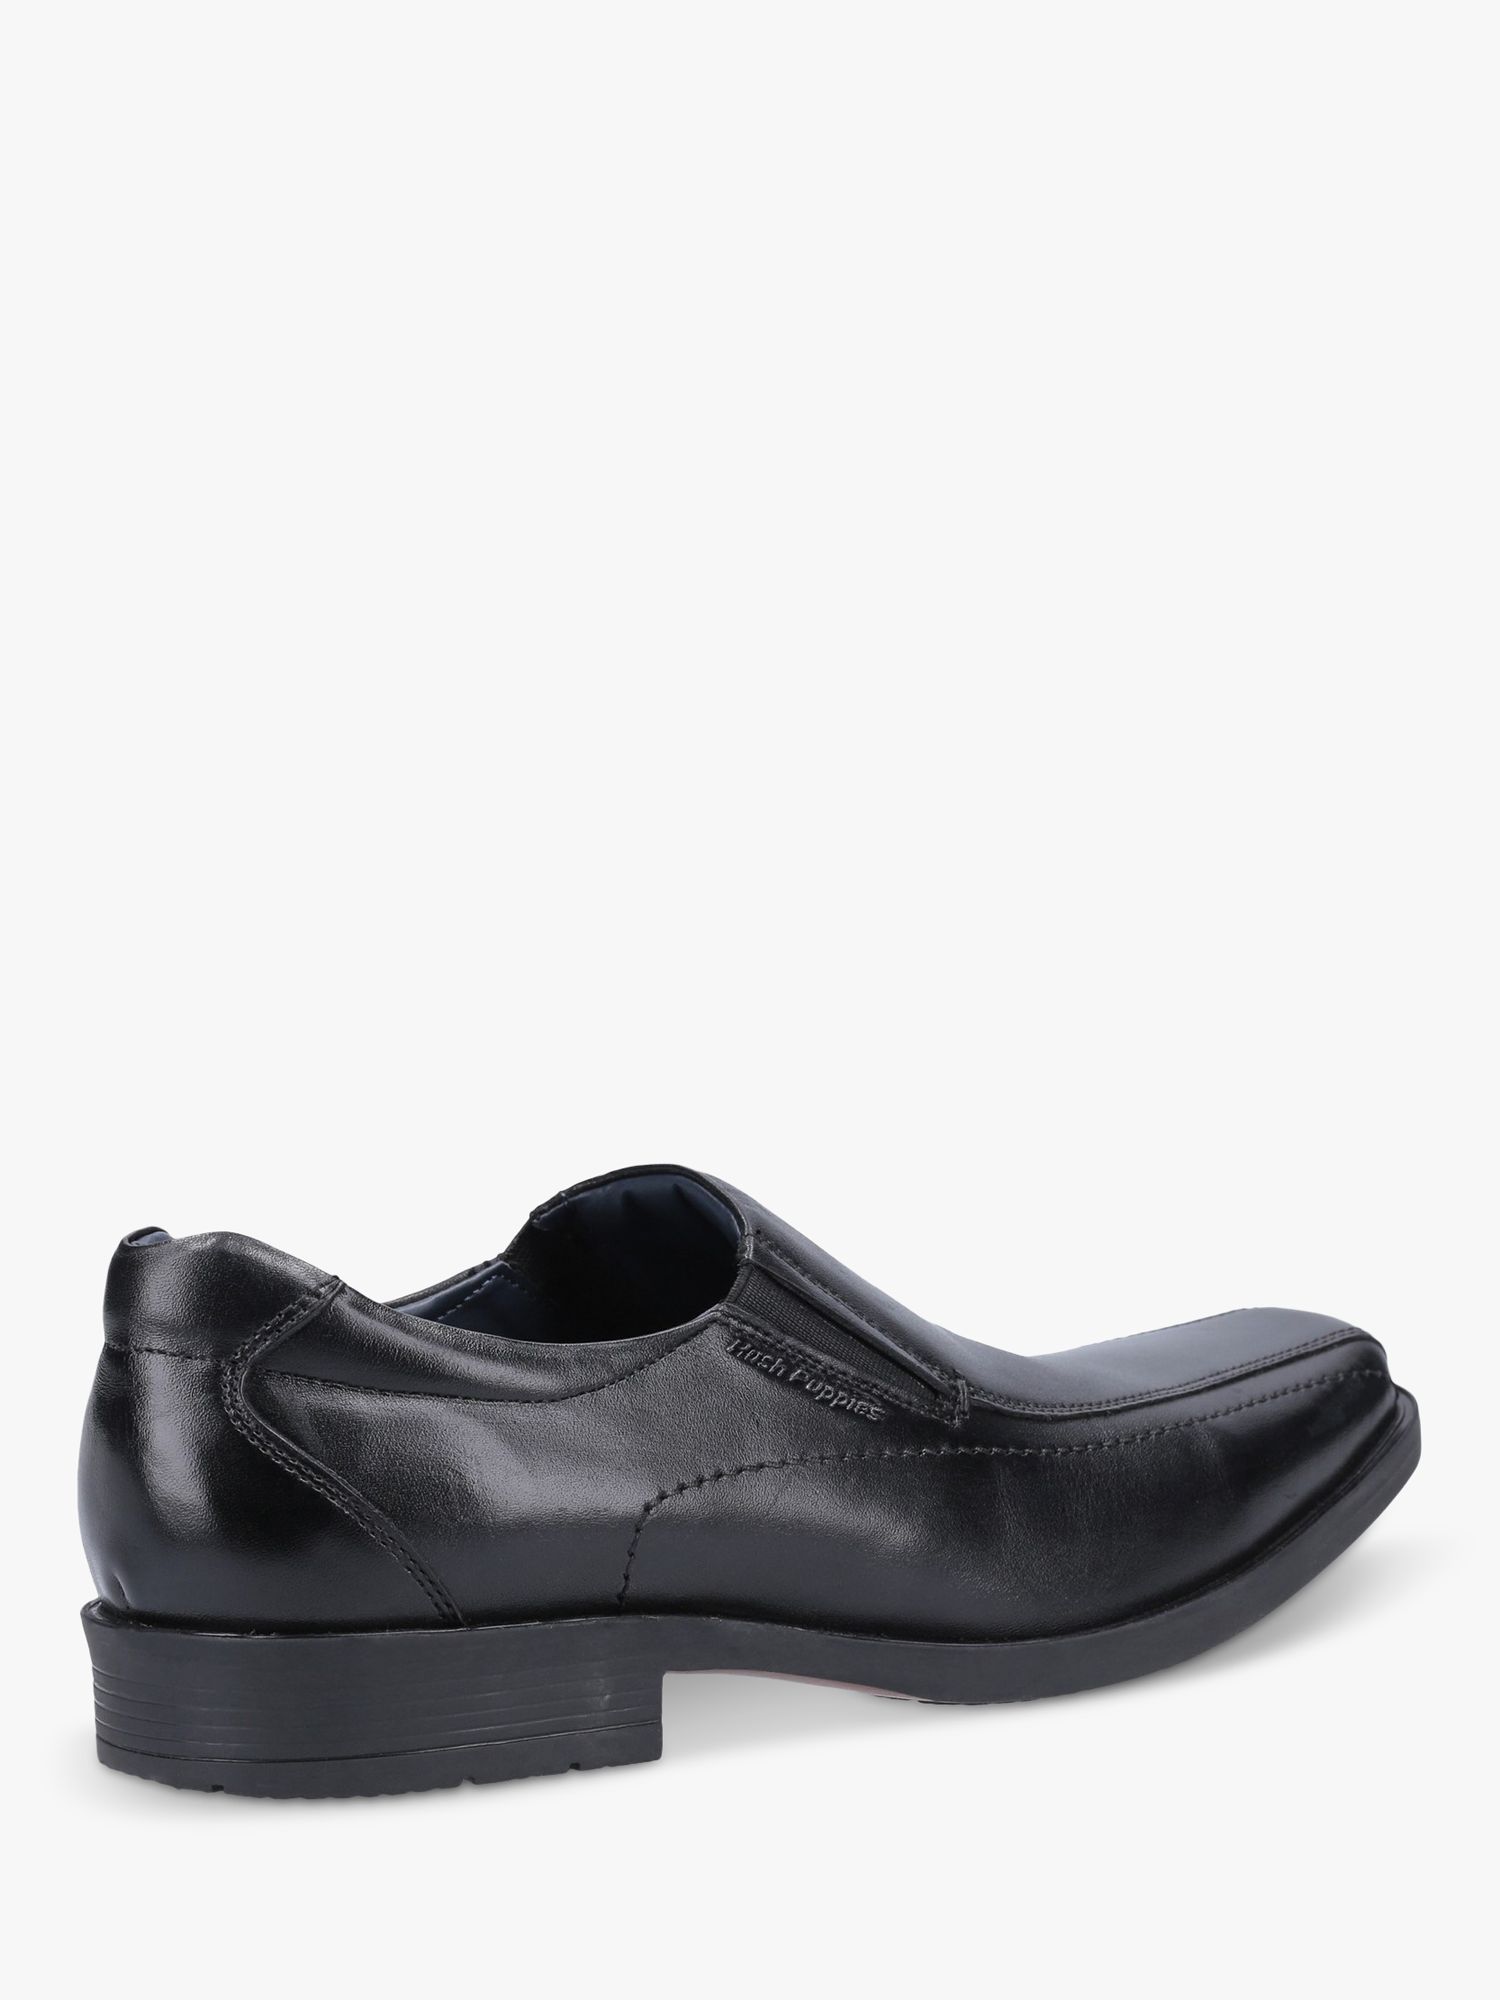 Hush Puppies Brody Leather Slip On Shoes, Black, 6